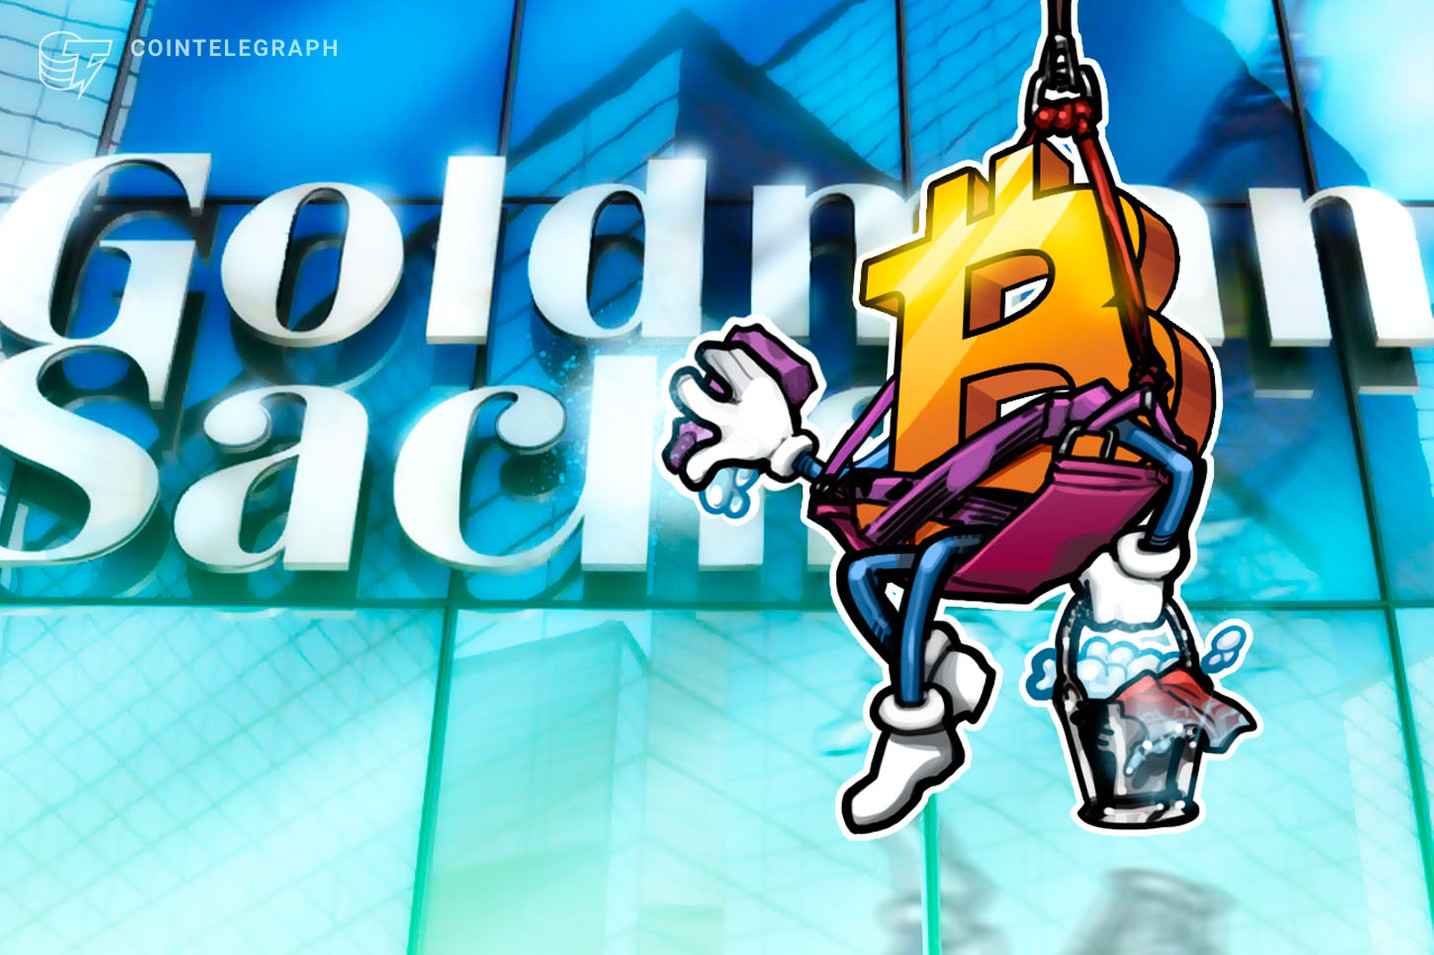 Reports suggest Goldman Sachs is now offering Bitcoin derivatives